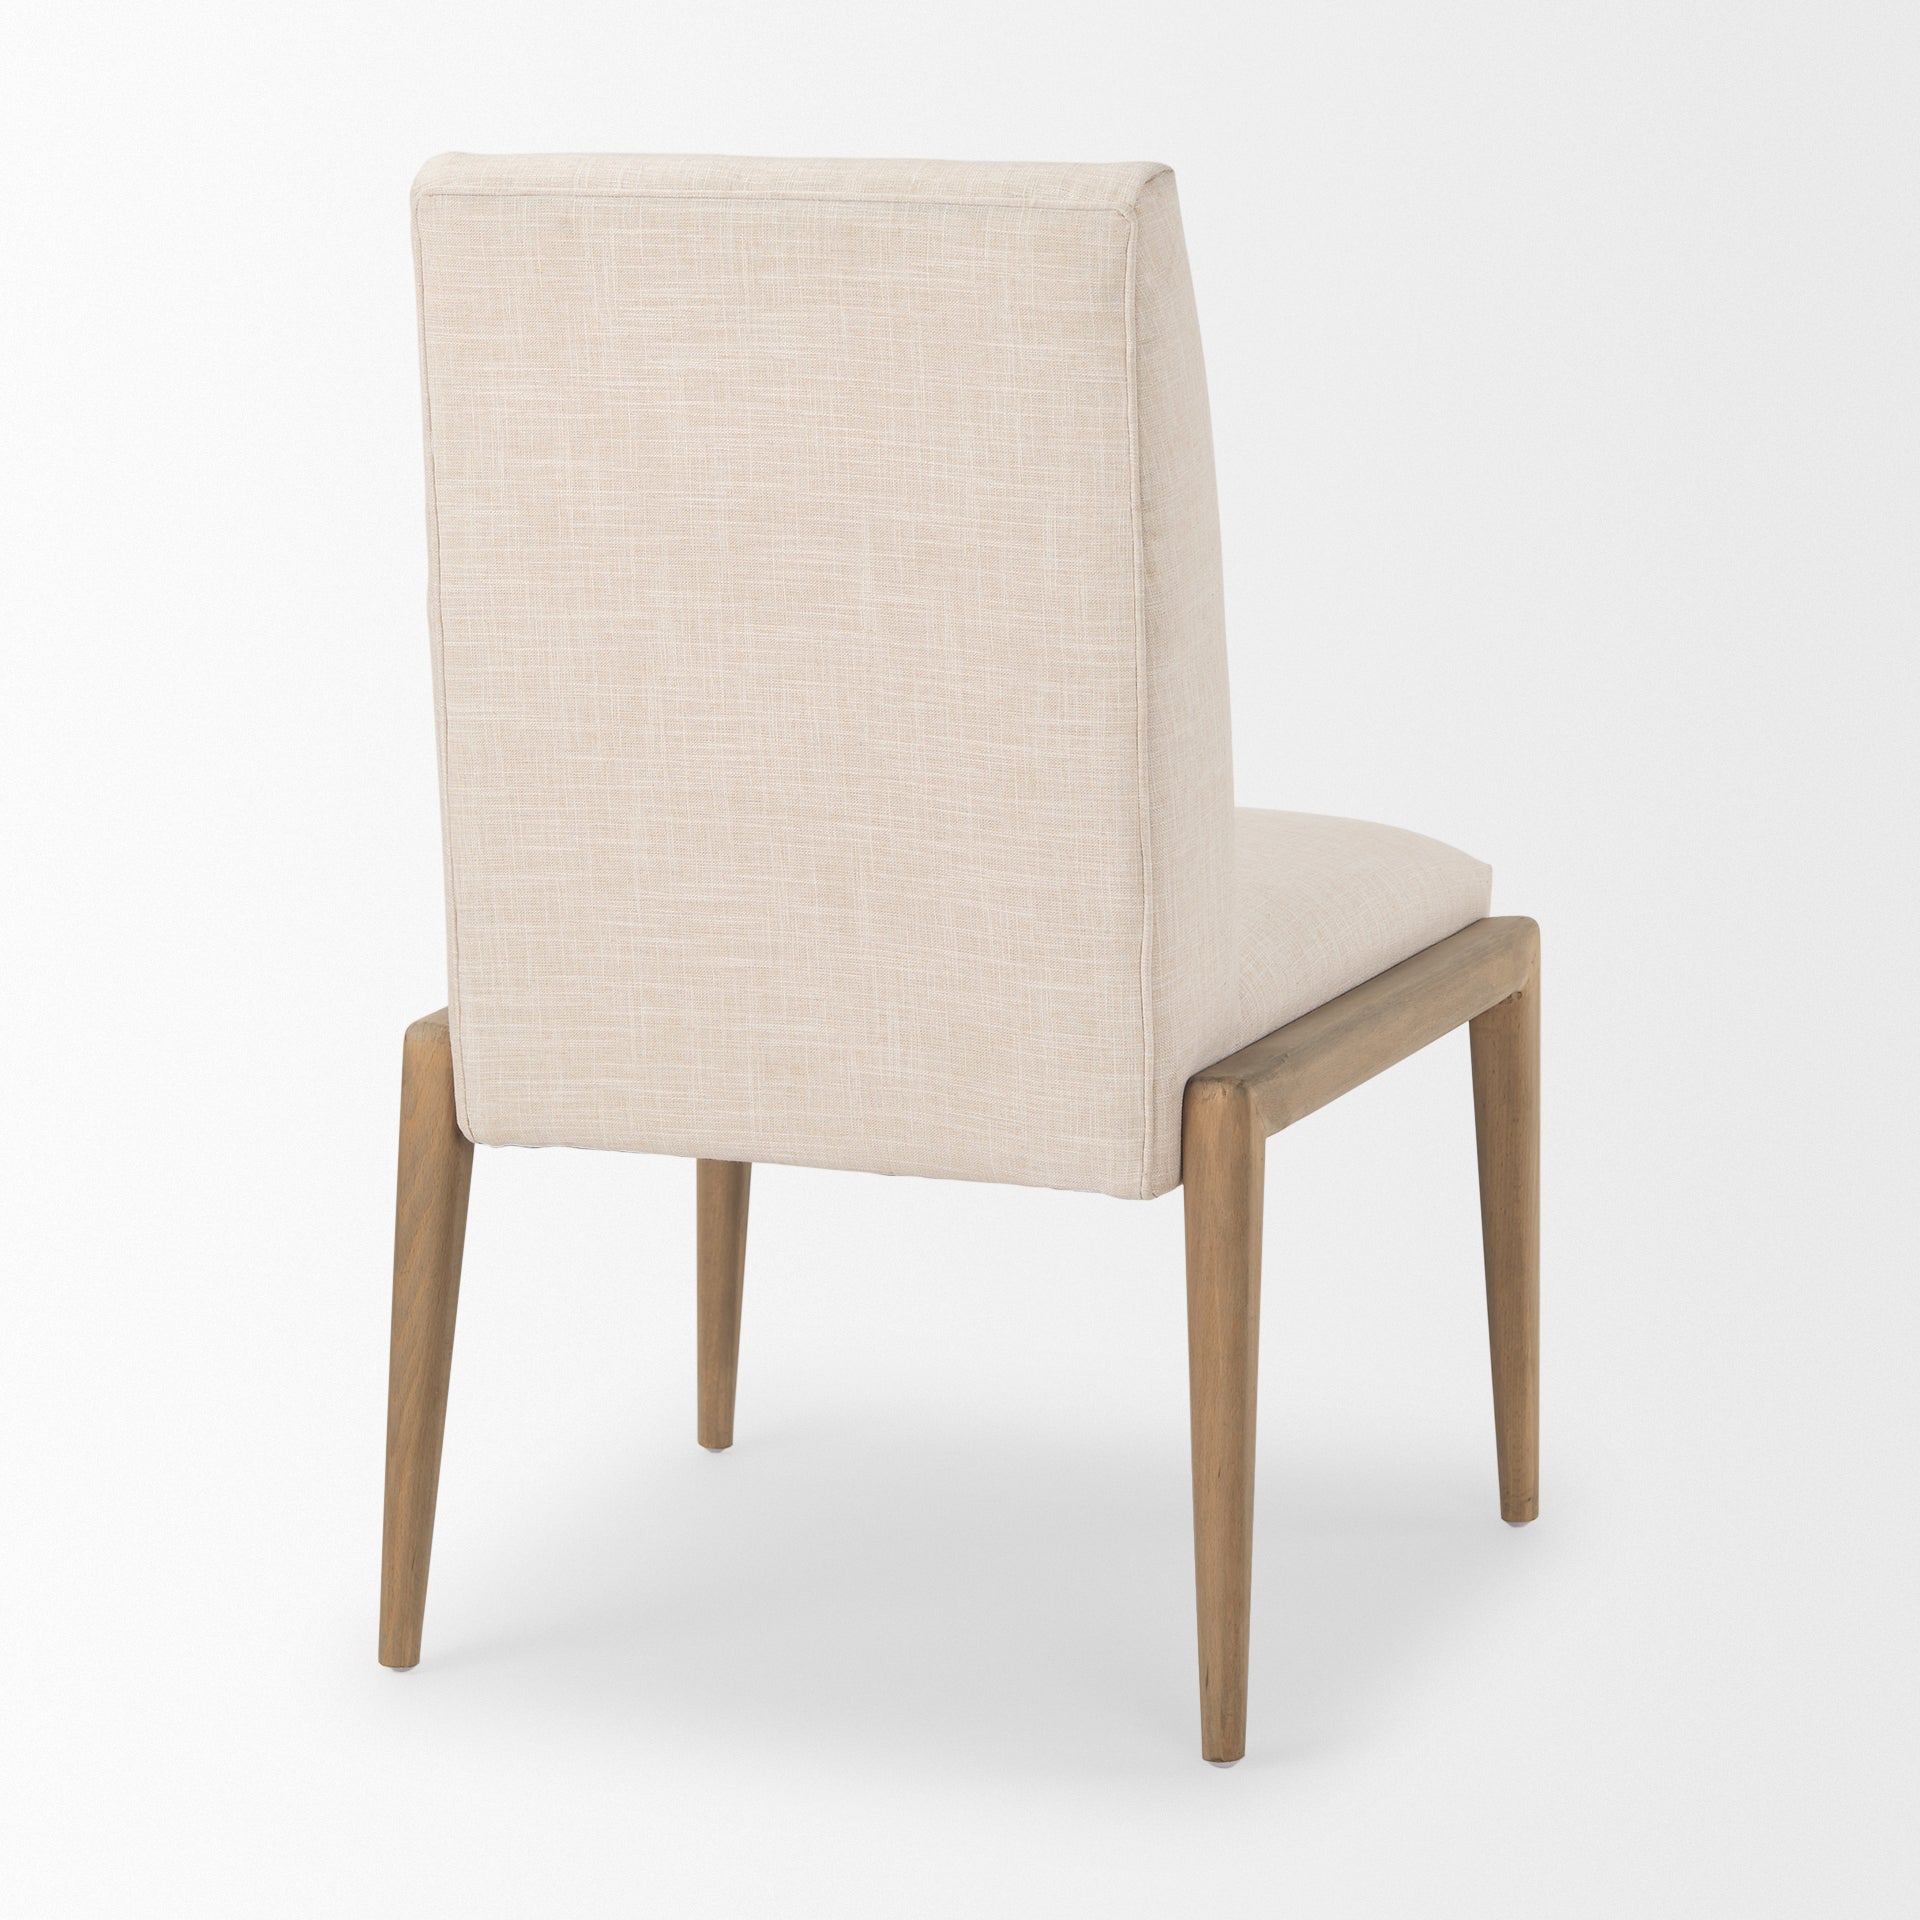 Palisades Armless Cream Dining Chair - Set Of 2